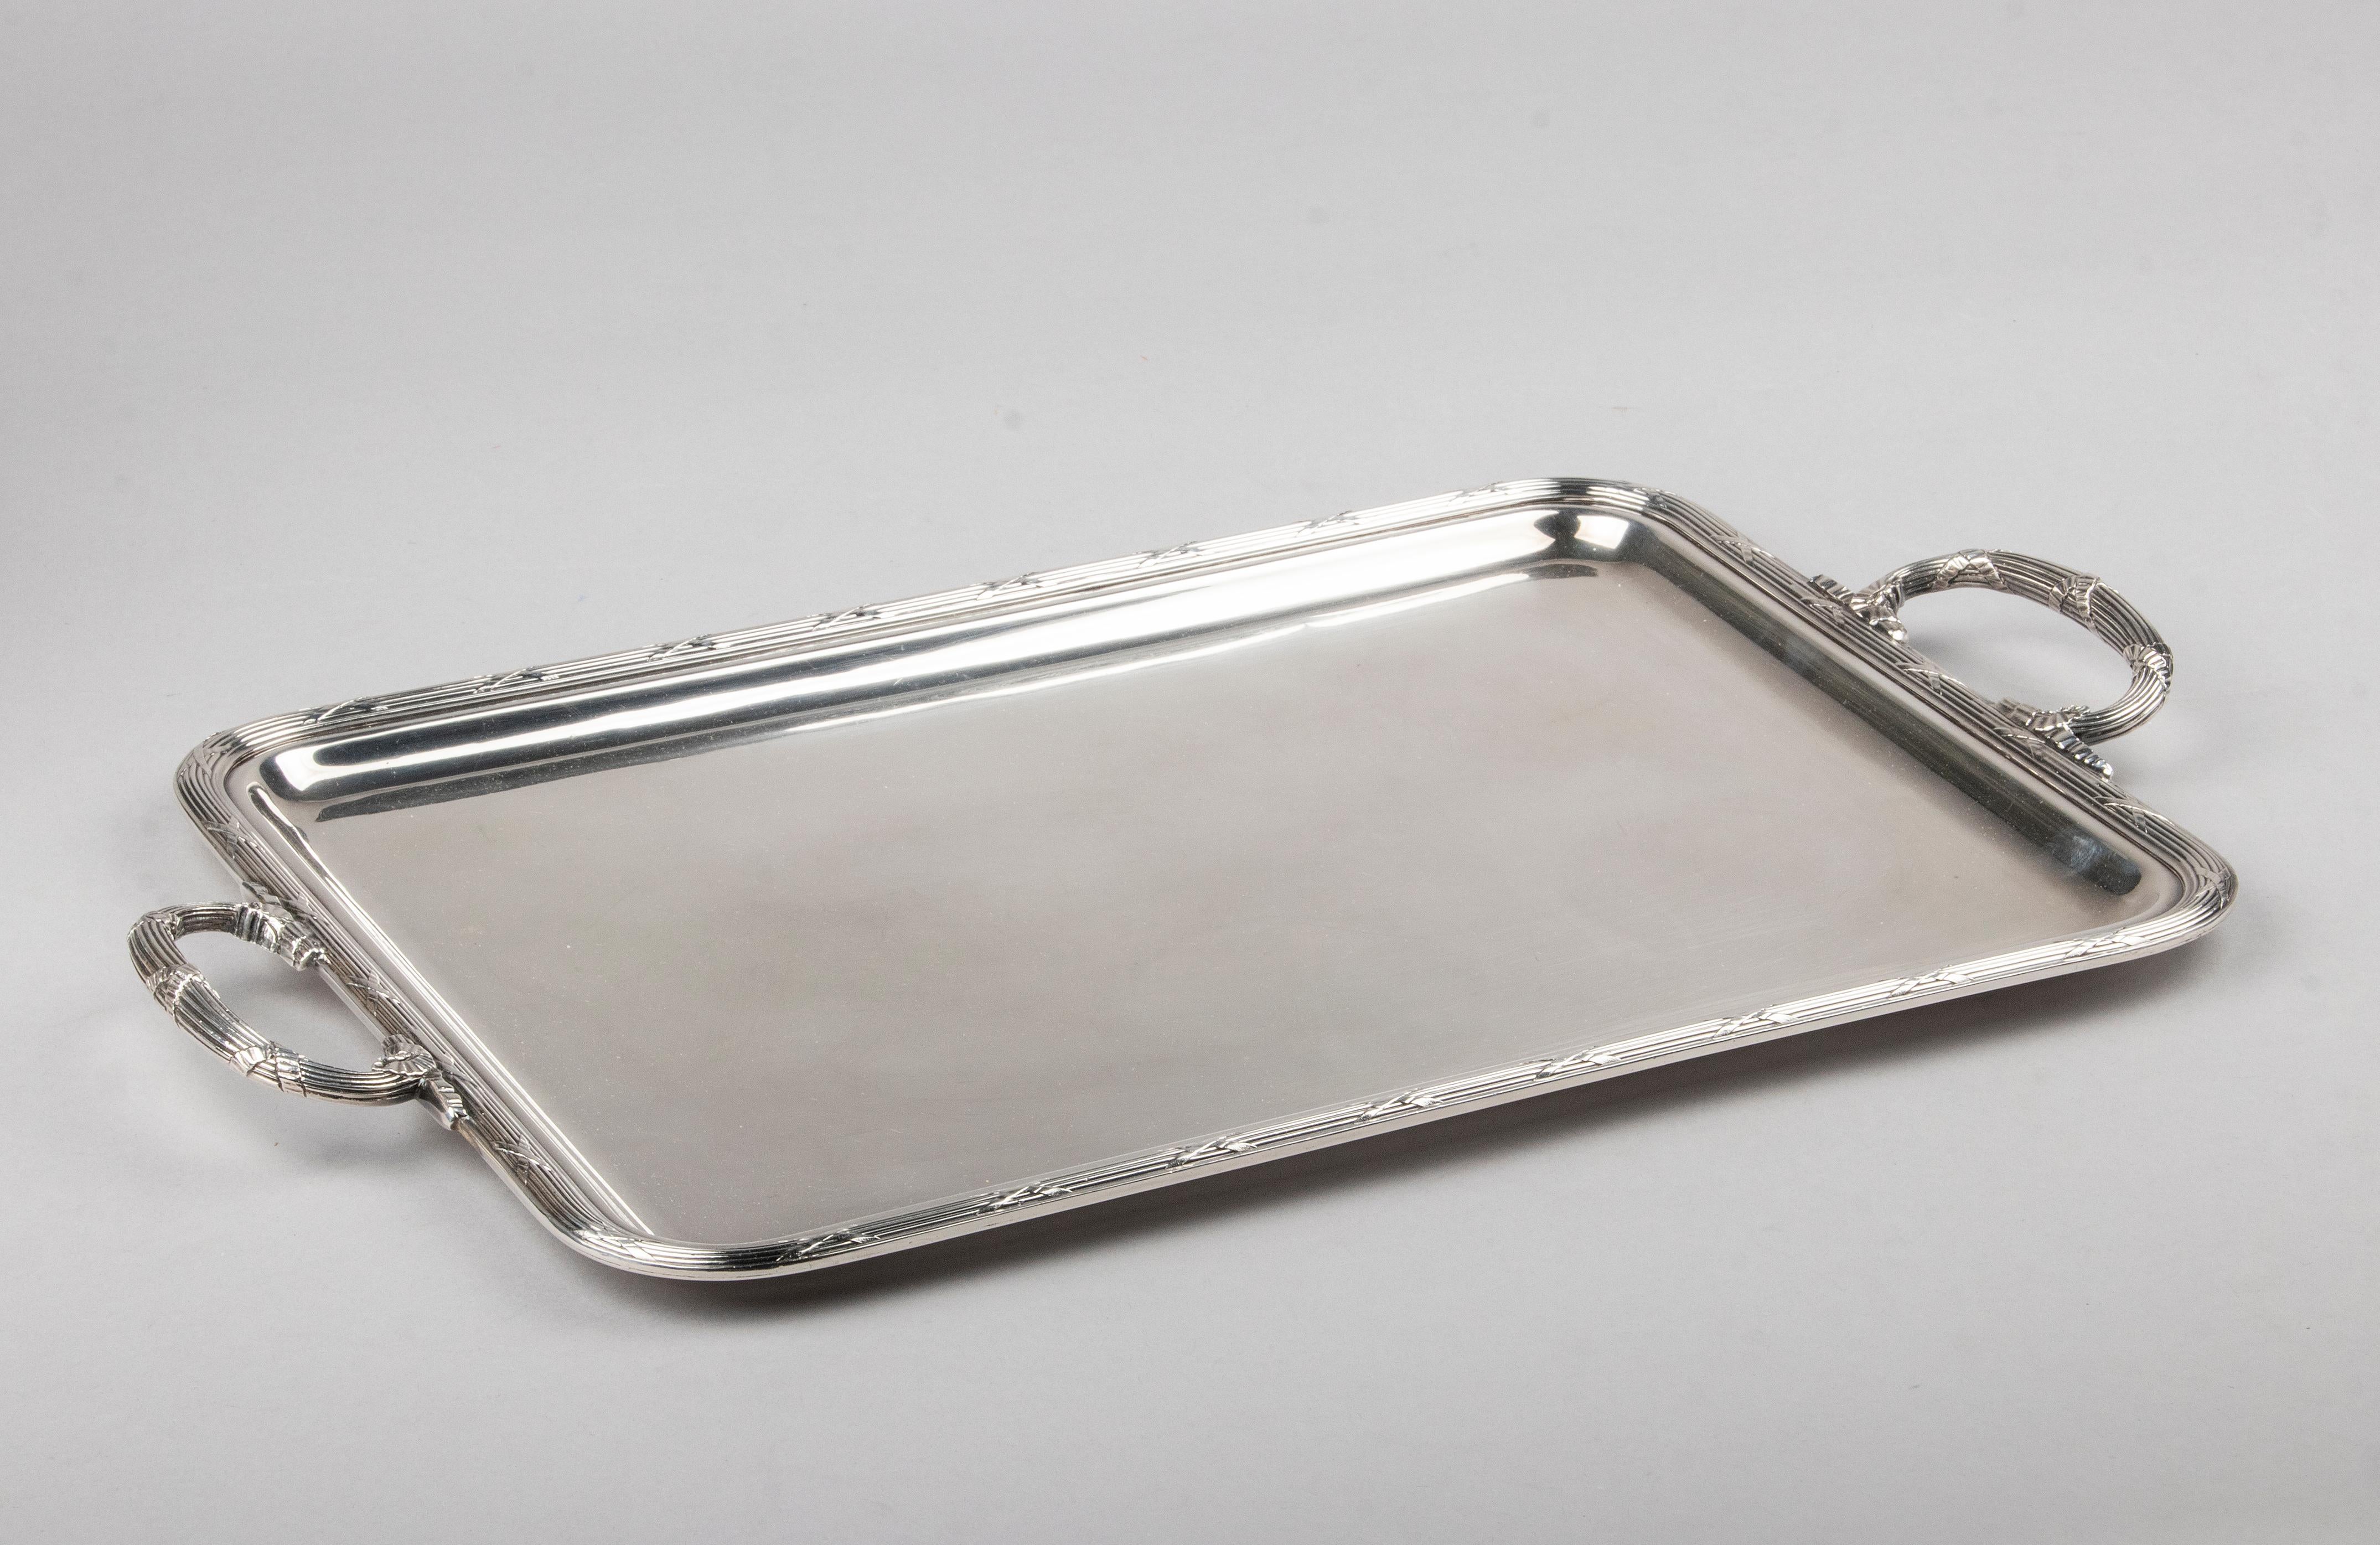 Mid-Century Modern Silver Plated Serving Tray Made by Christofle France 1